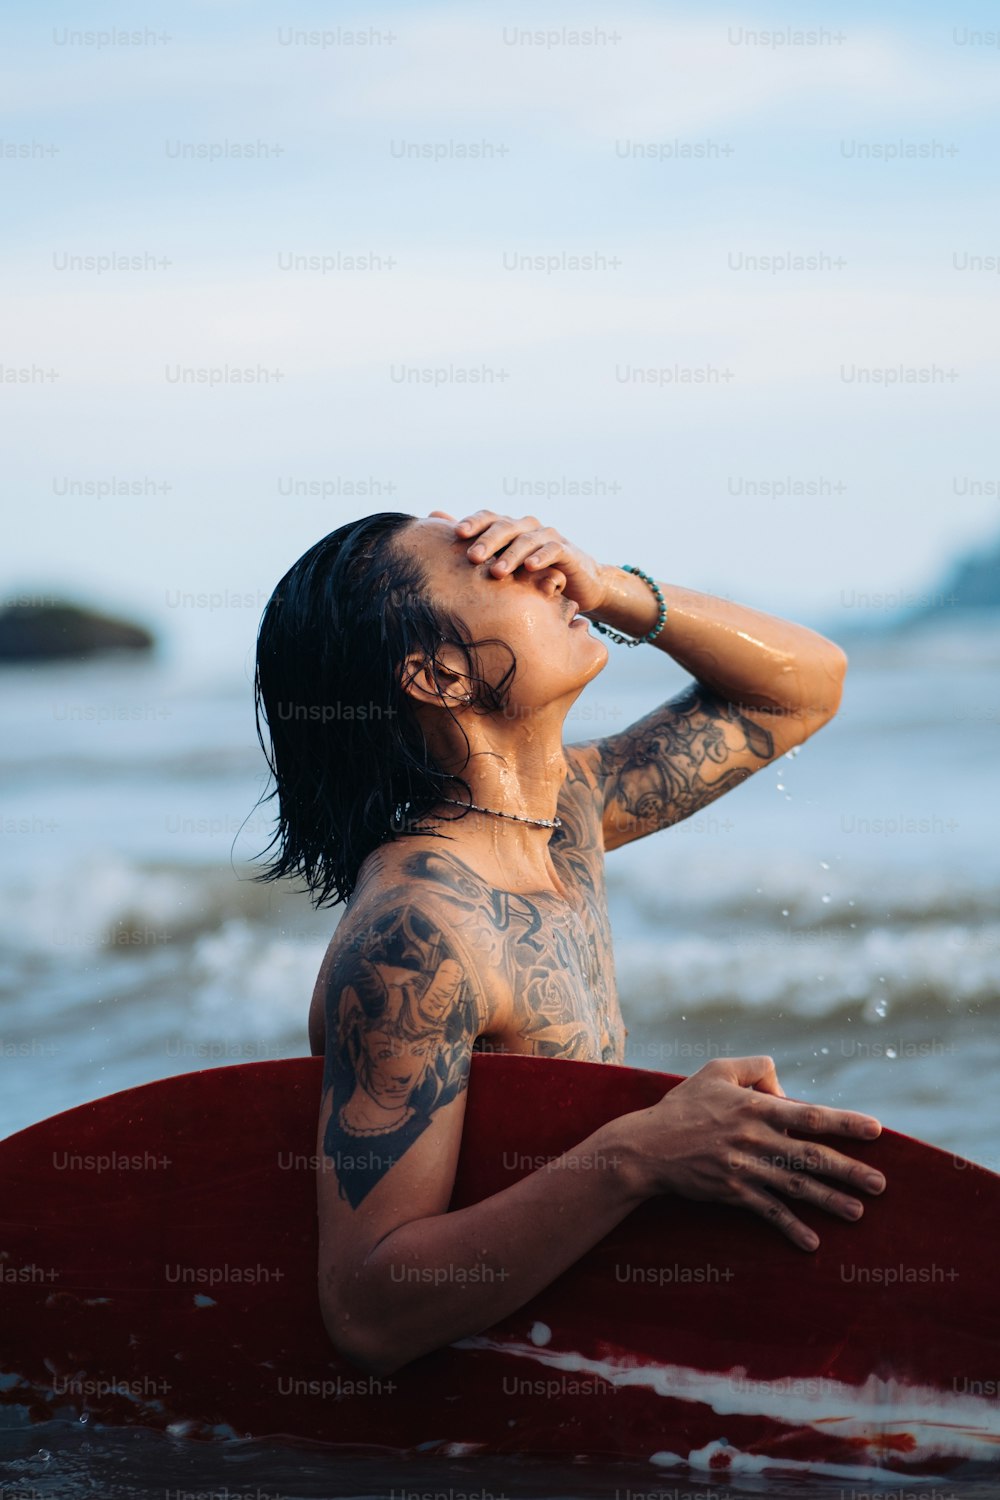 a man with tattoos on his body sitting on a surfboard